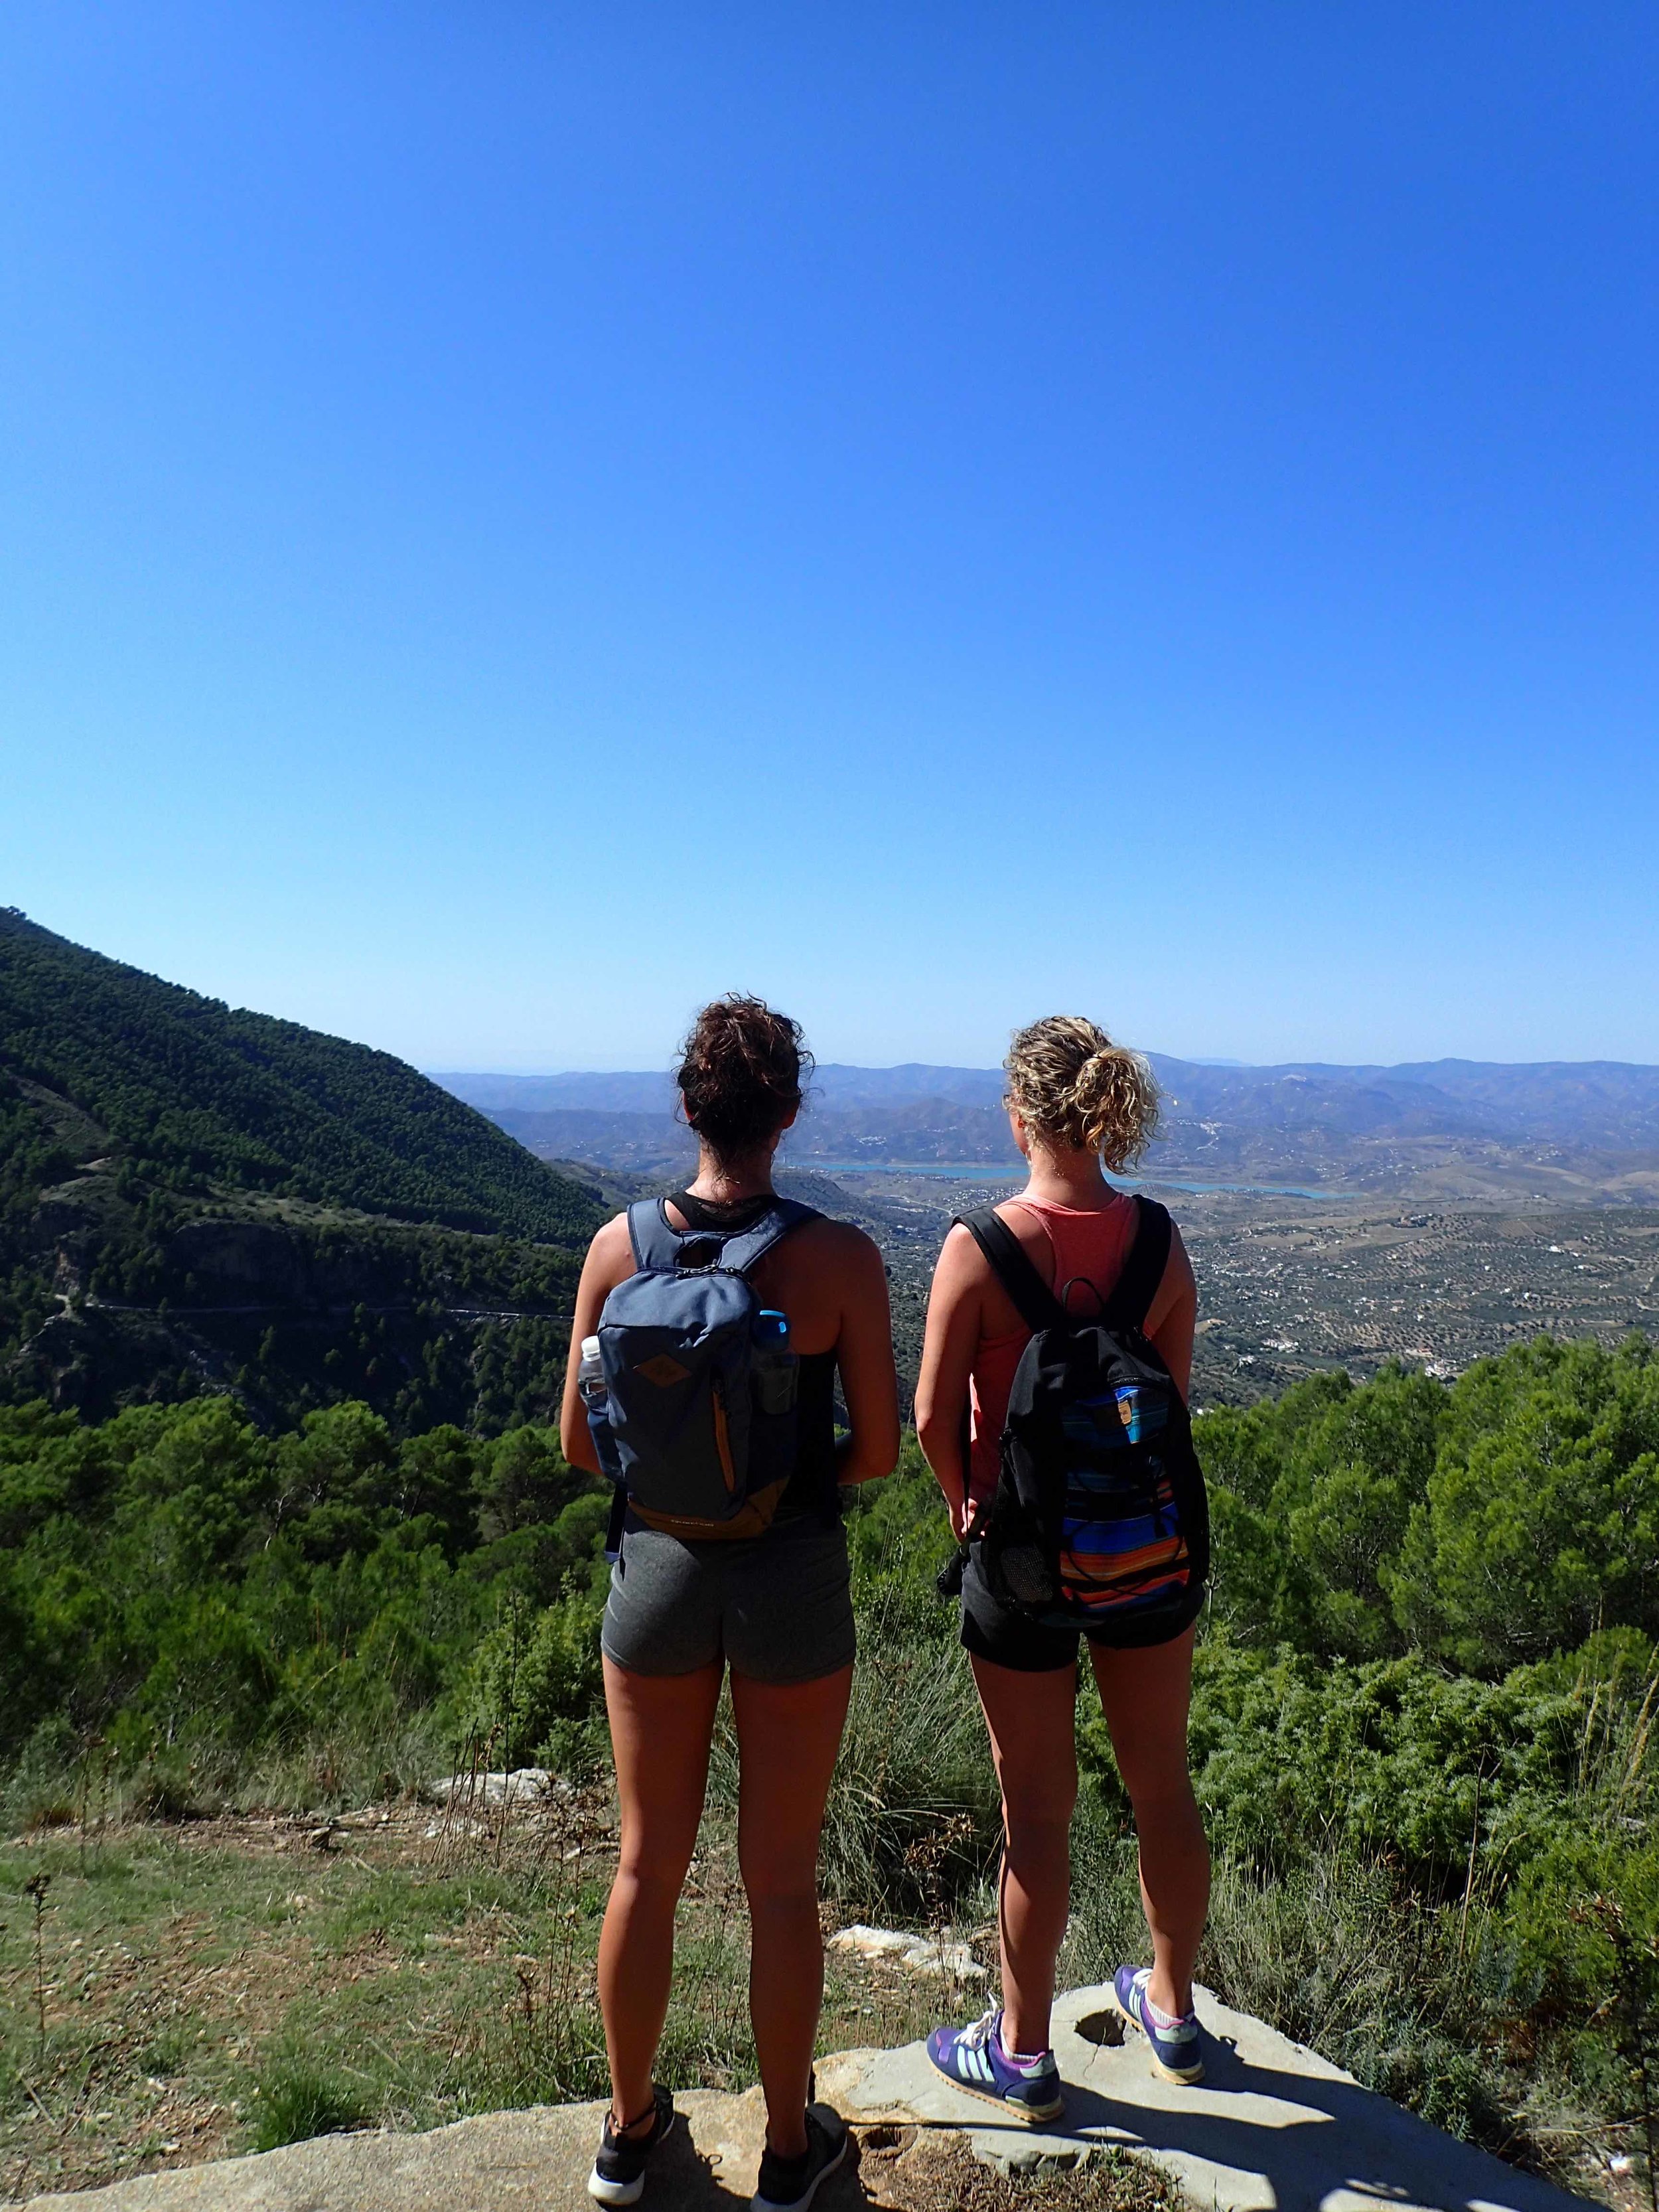 Sharing the amazing view at Yin Yang Yoga retreat in the Malaga mountains in Spain with Jane Bakx Yoga